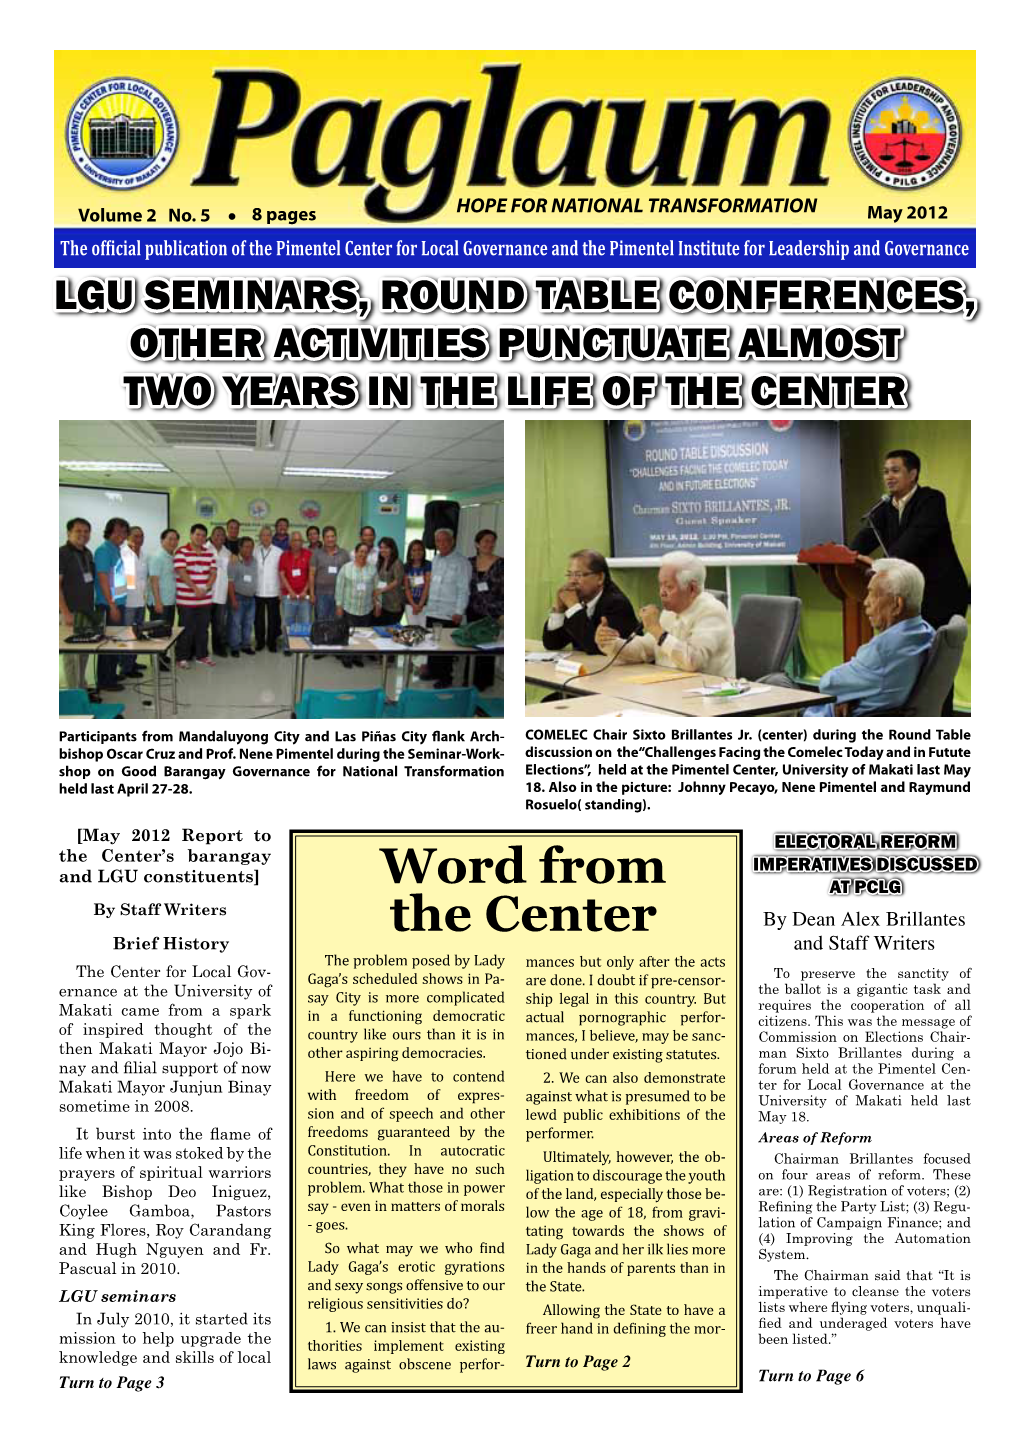 Paglaum Newsletter May 2012 Issue